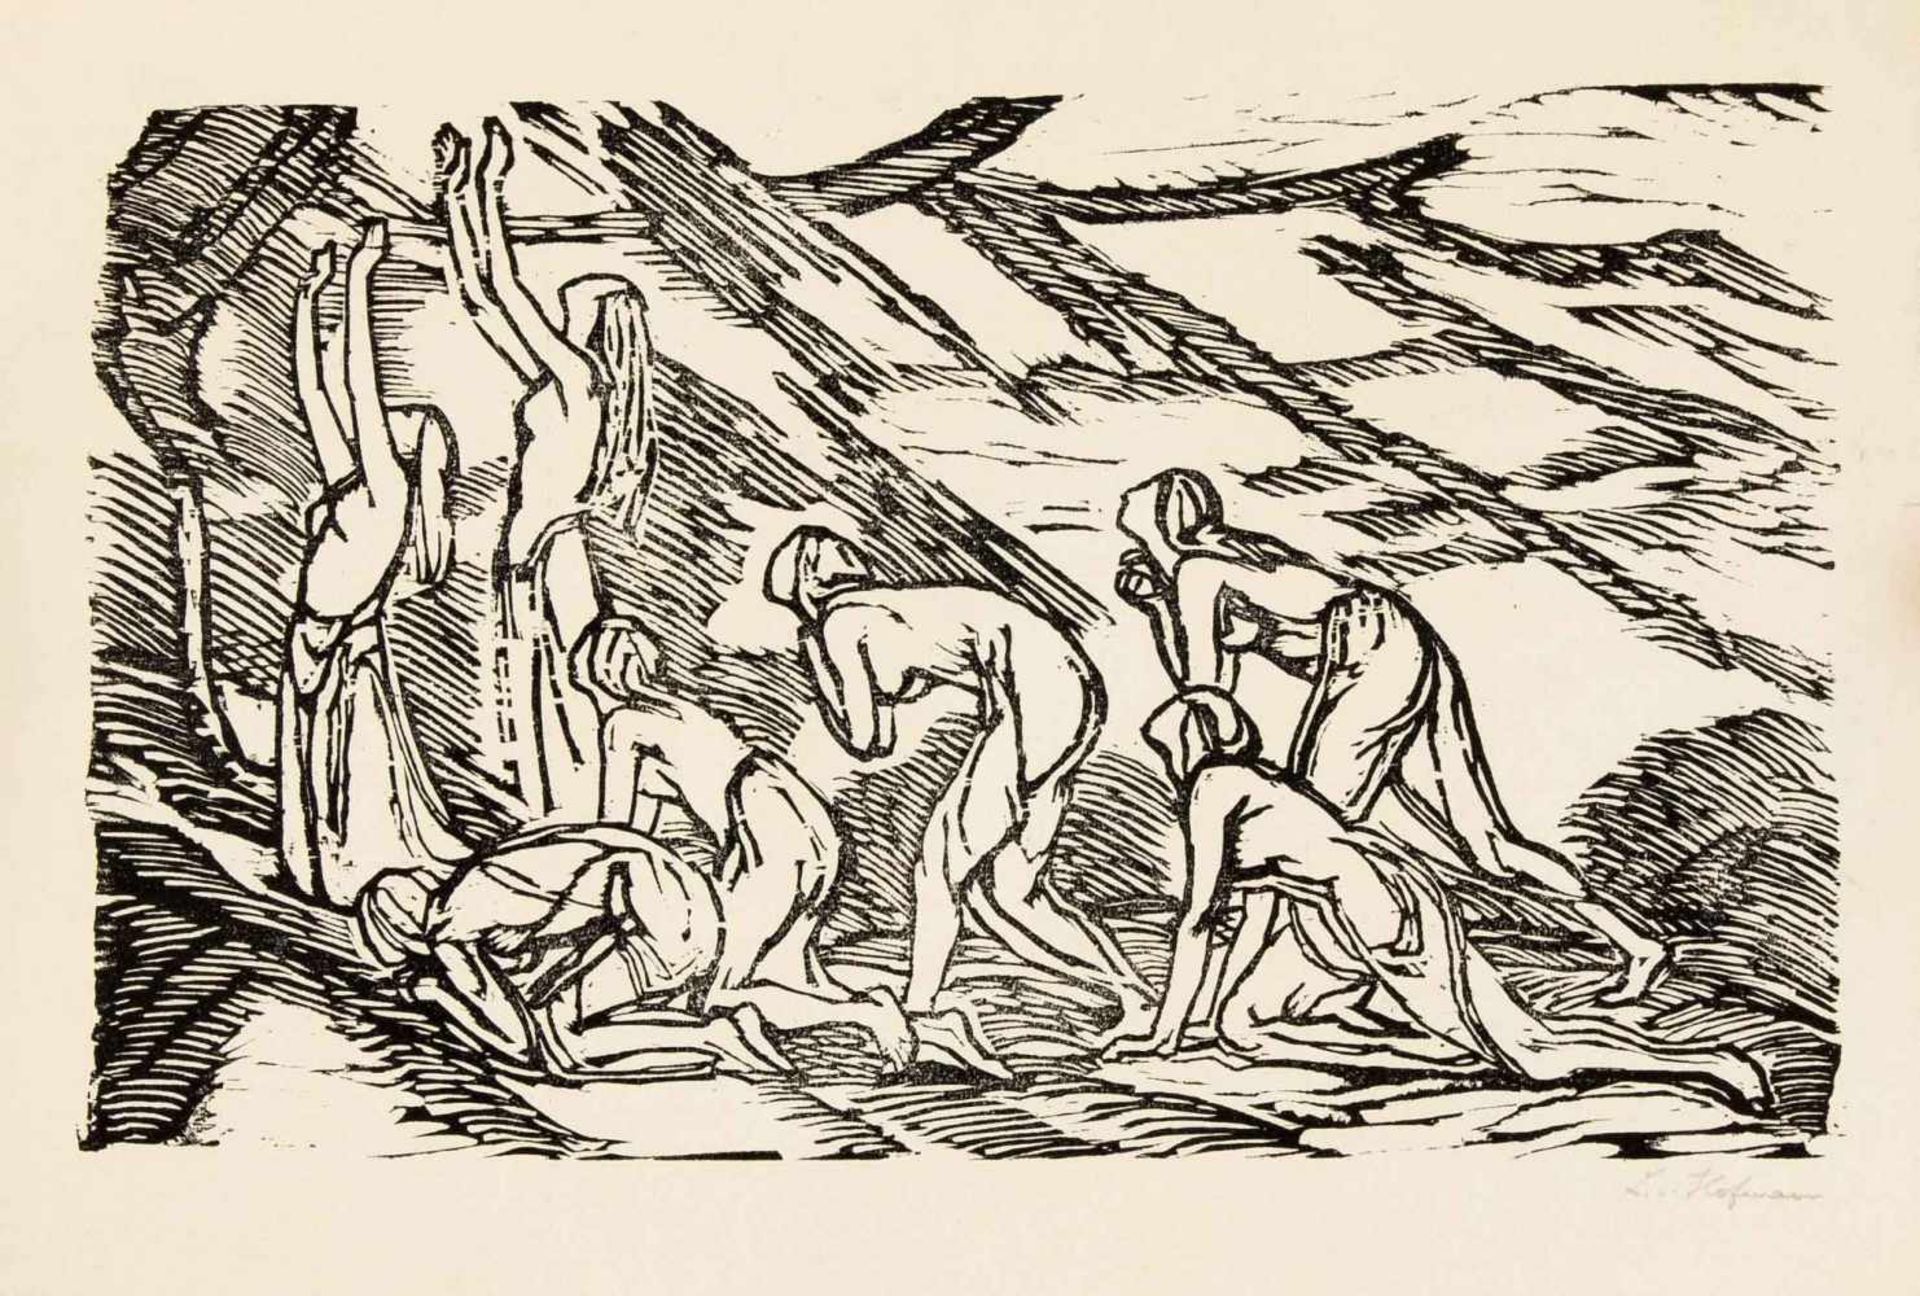 Ludwig von Hoffmann (1861-1945), group of women in adoring posture, woodcut on wove paper,